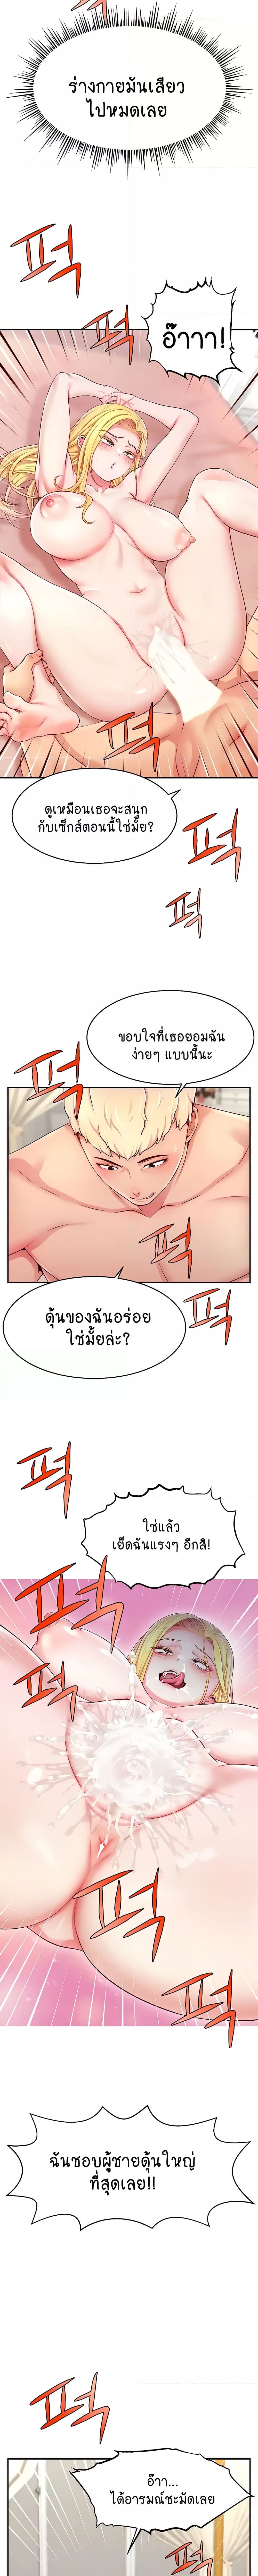 Making Friends With Streamers by Hacking! ตอนที่ 6 ภาพ 2